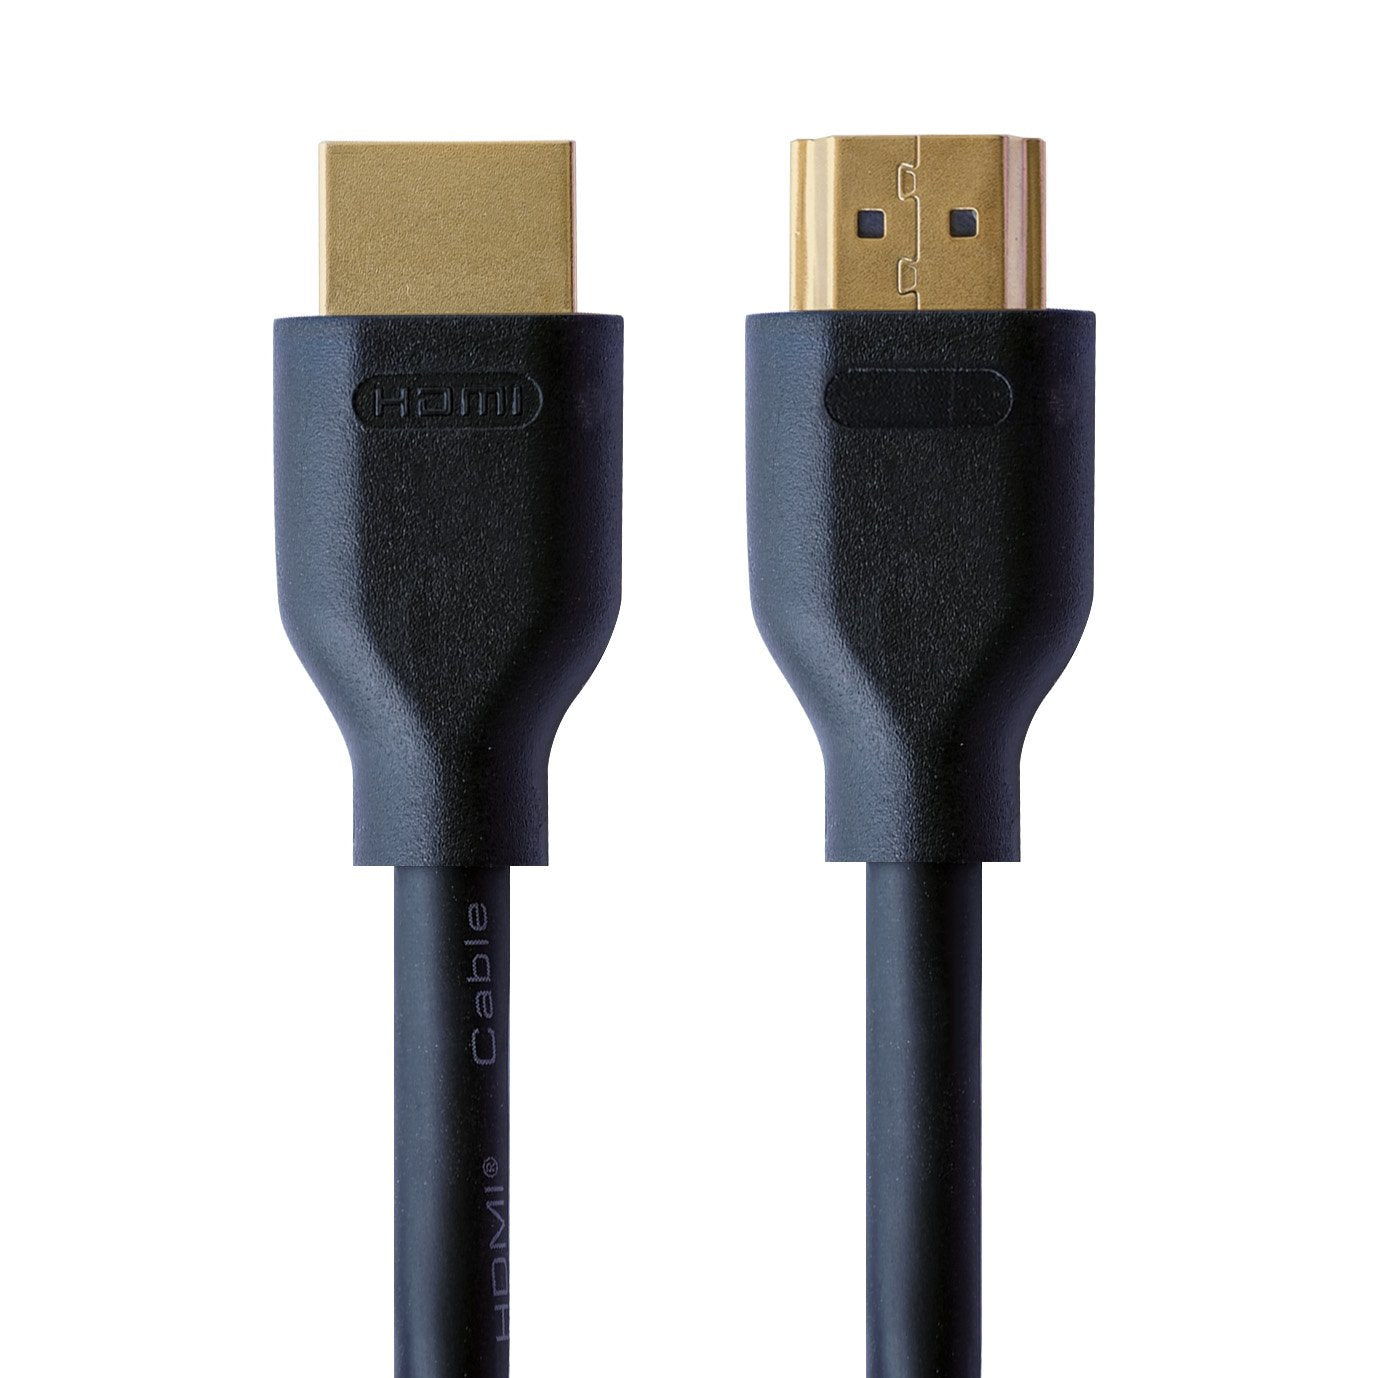 2.0m Ultra High Speed Premium HDMI Cable / Lead v2.1 - 48Gbps/ 8K/ 60Hz (C-HDMI2.1-2)